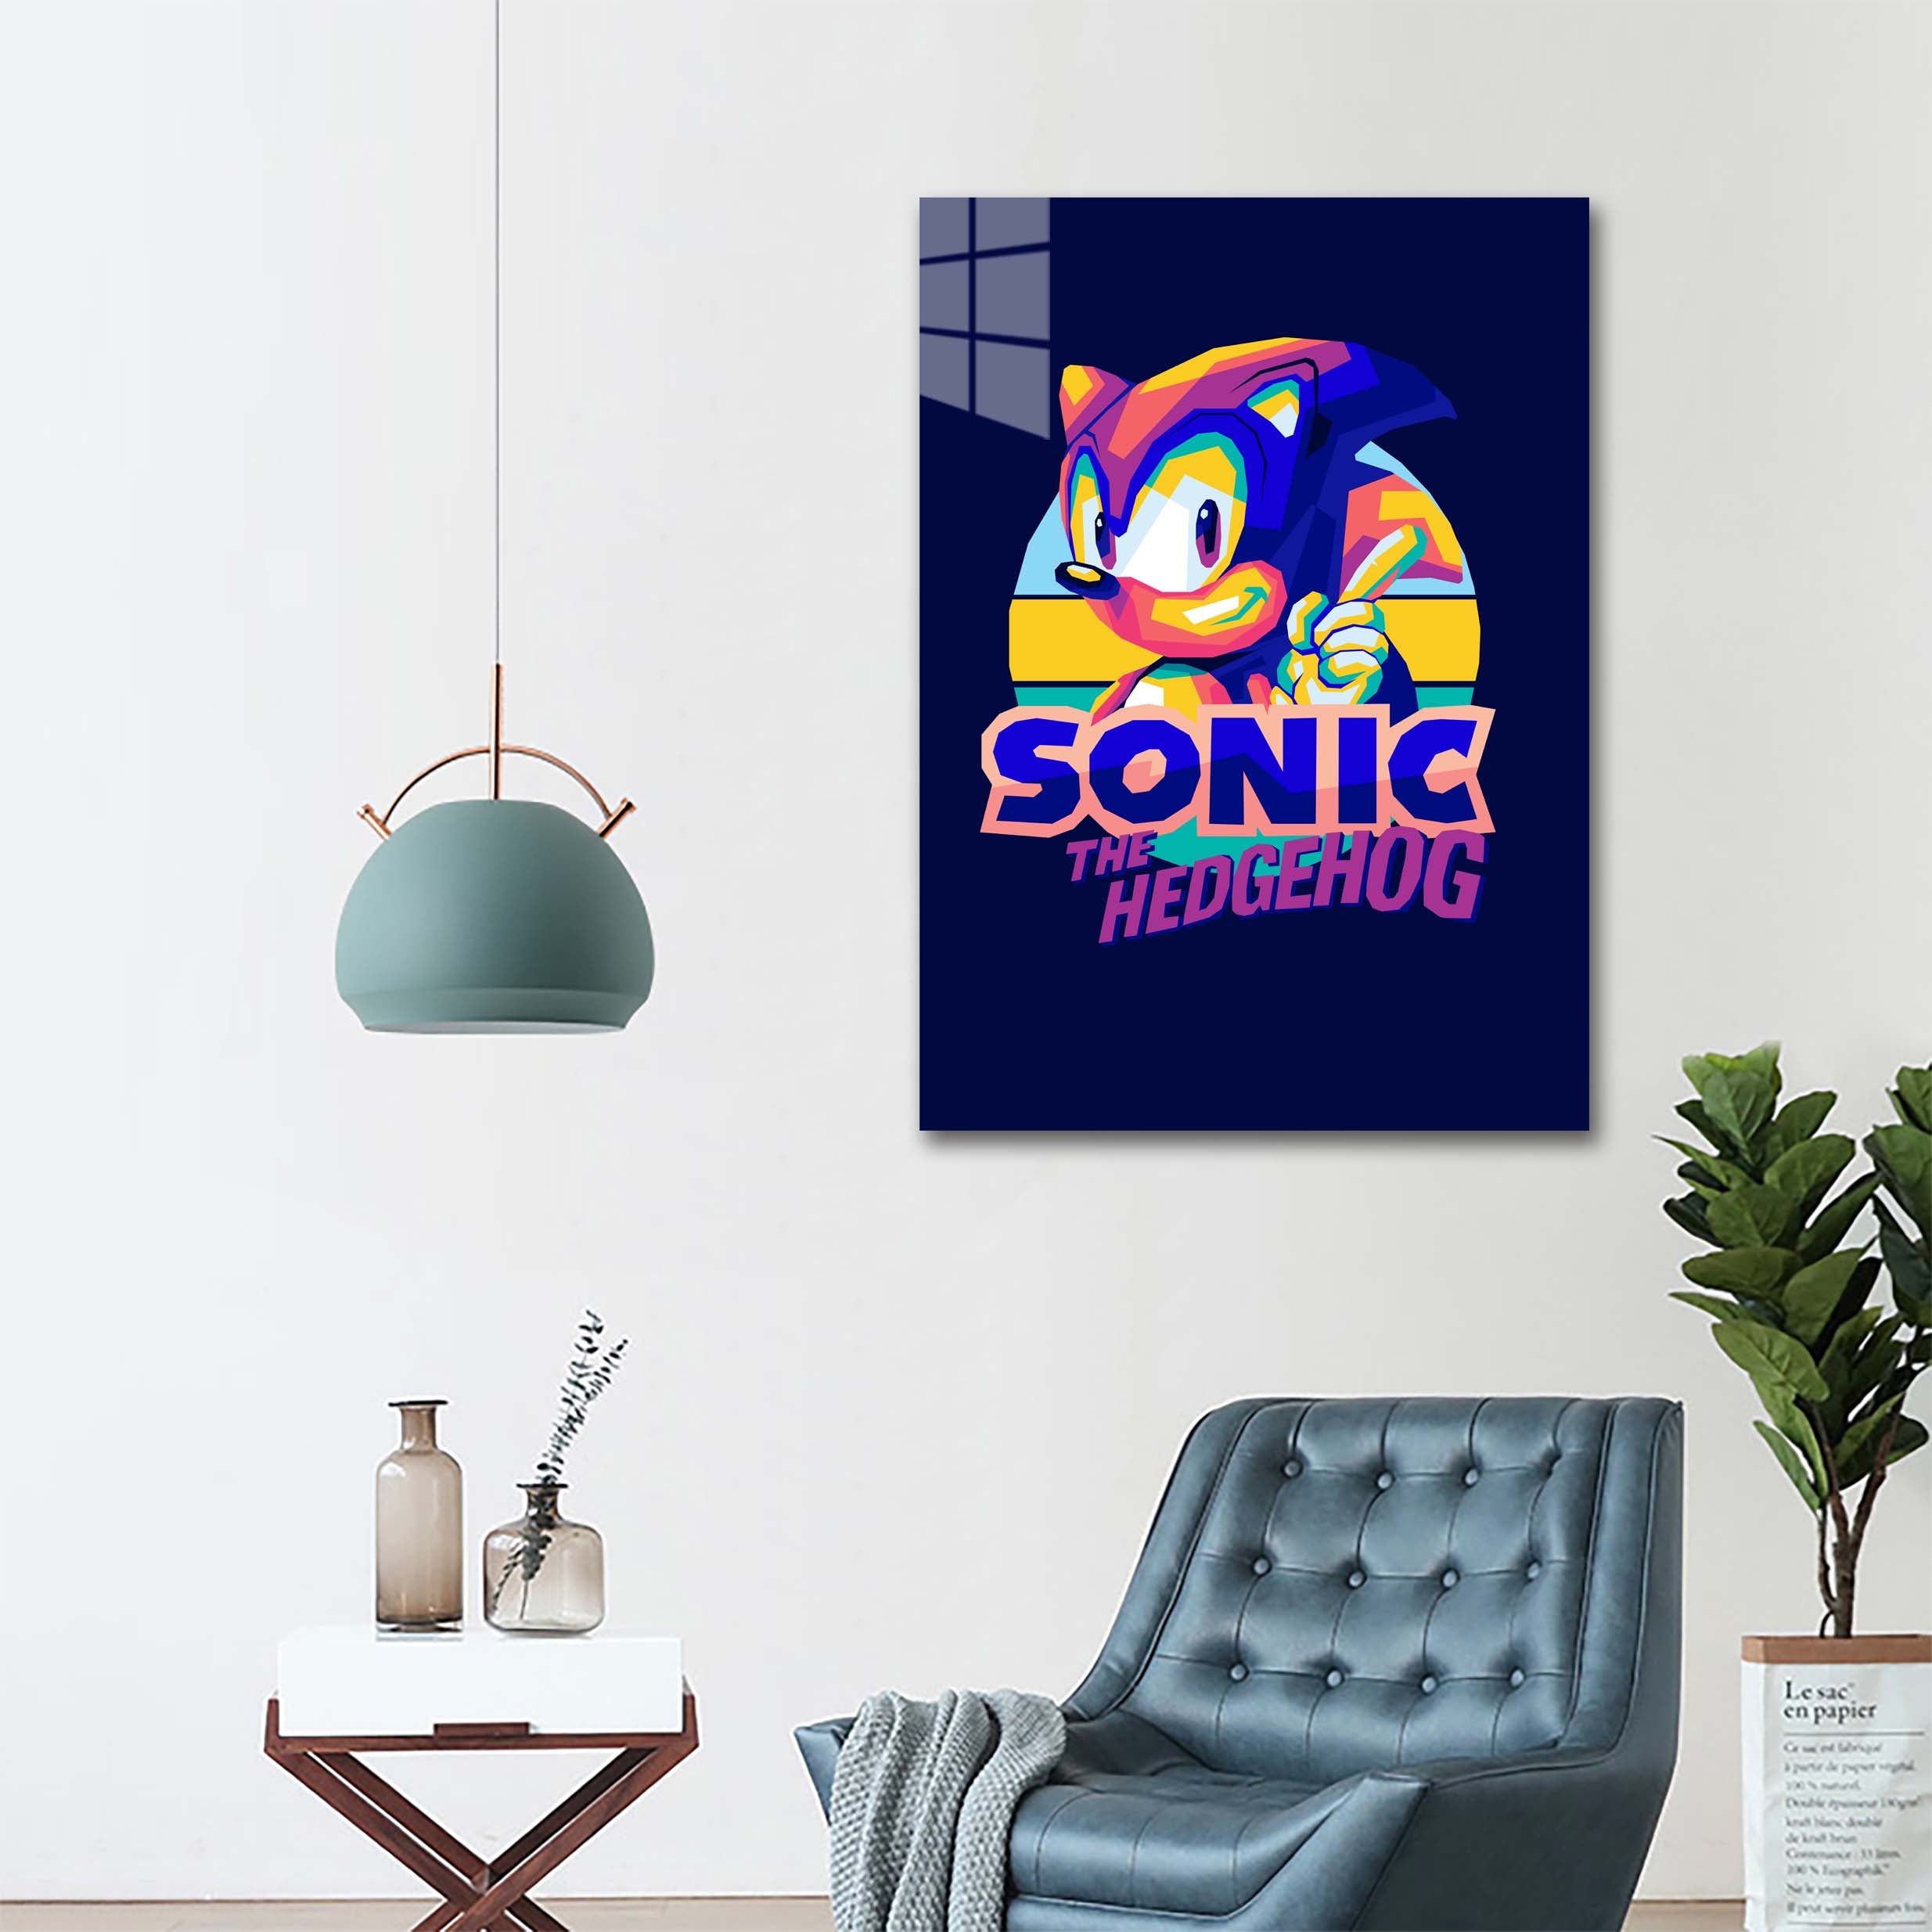 sonic1-01-designed by @Wpapmalang